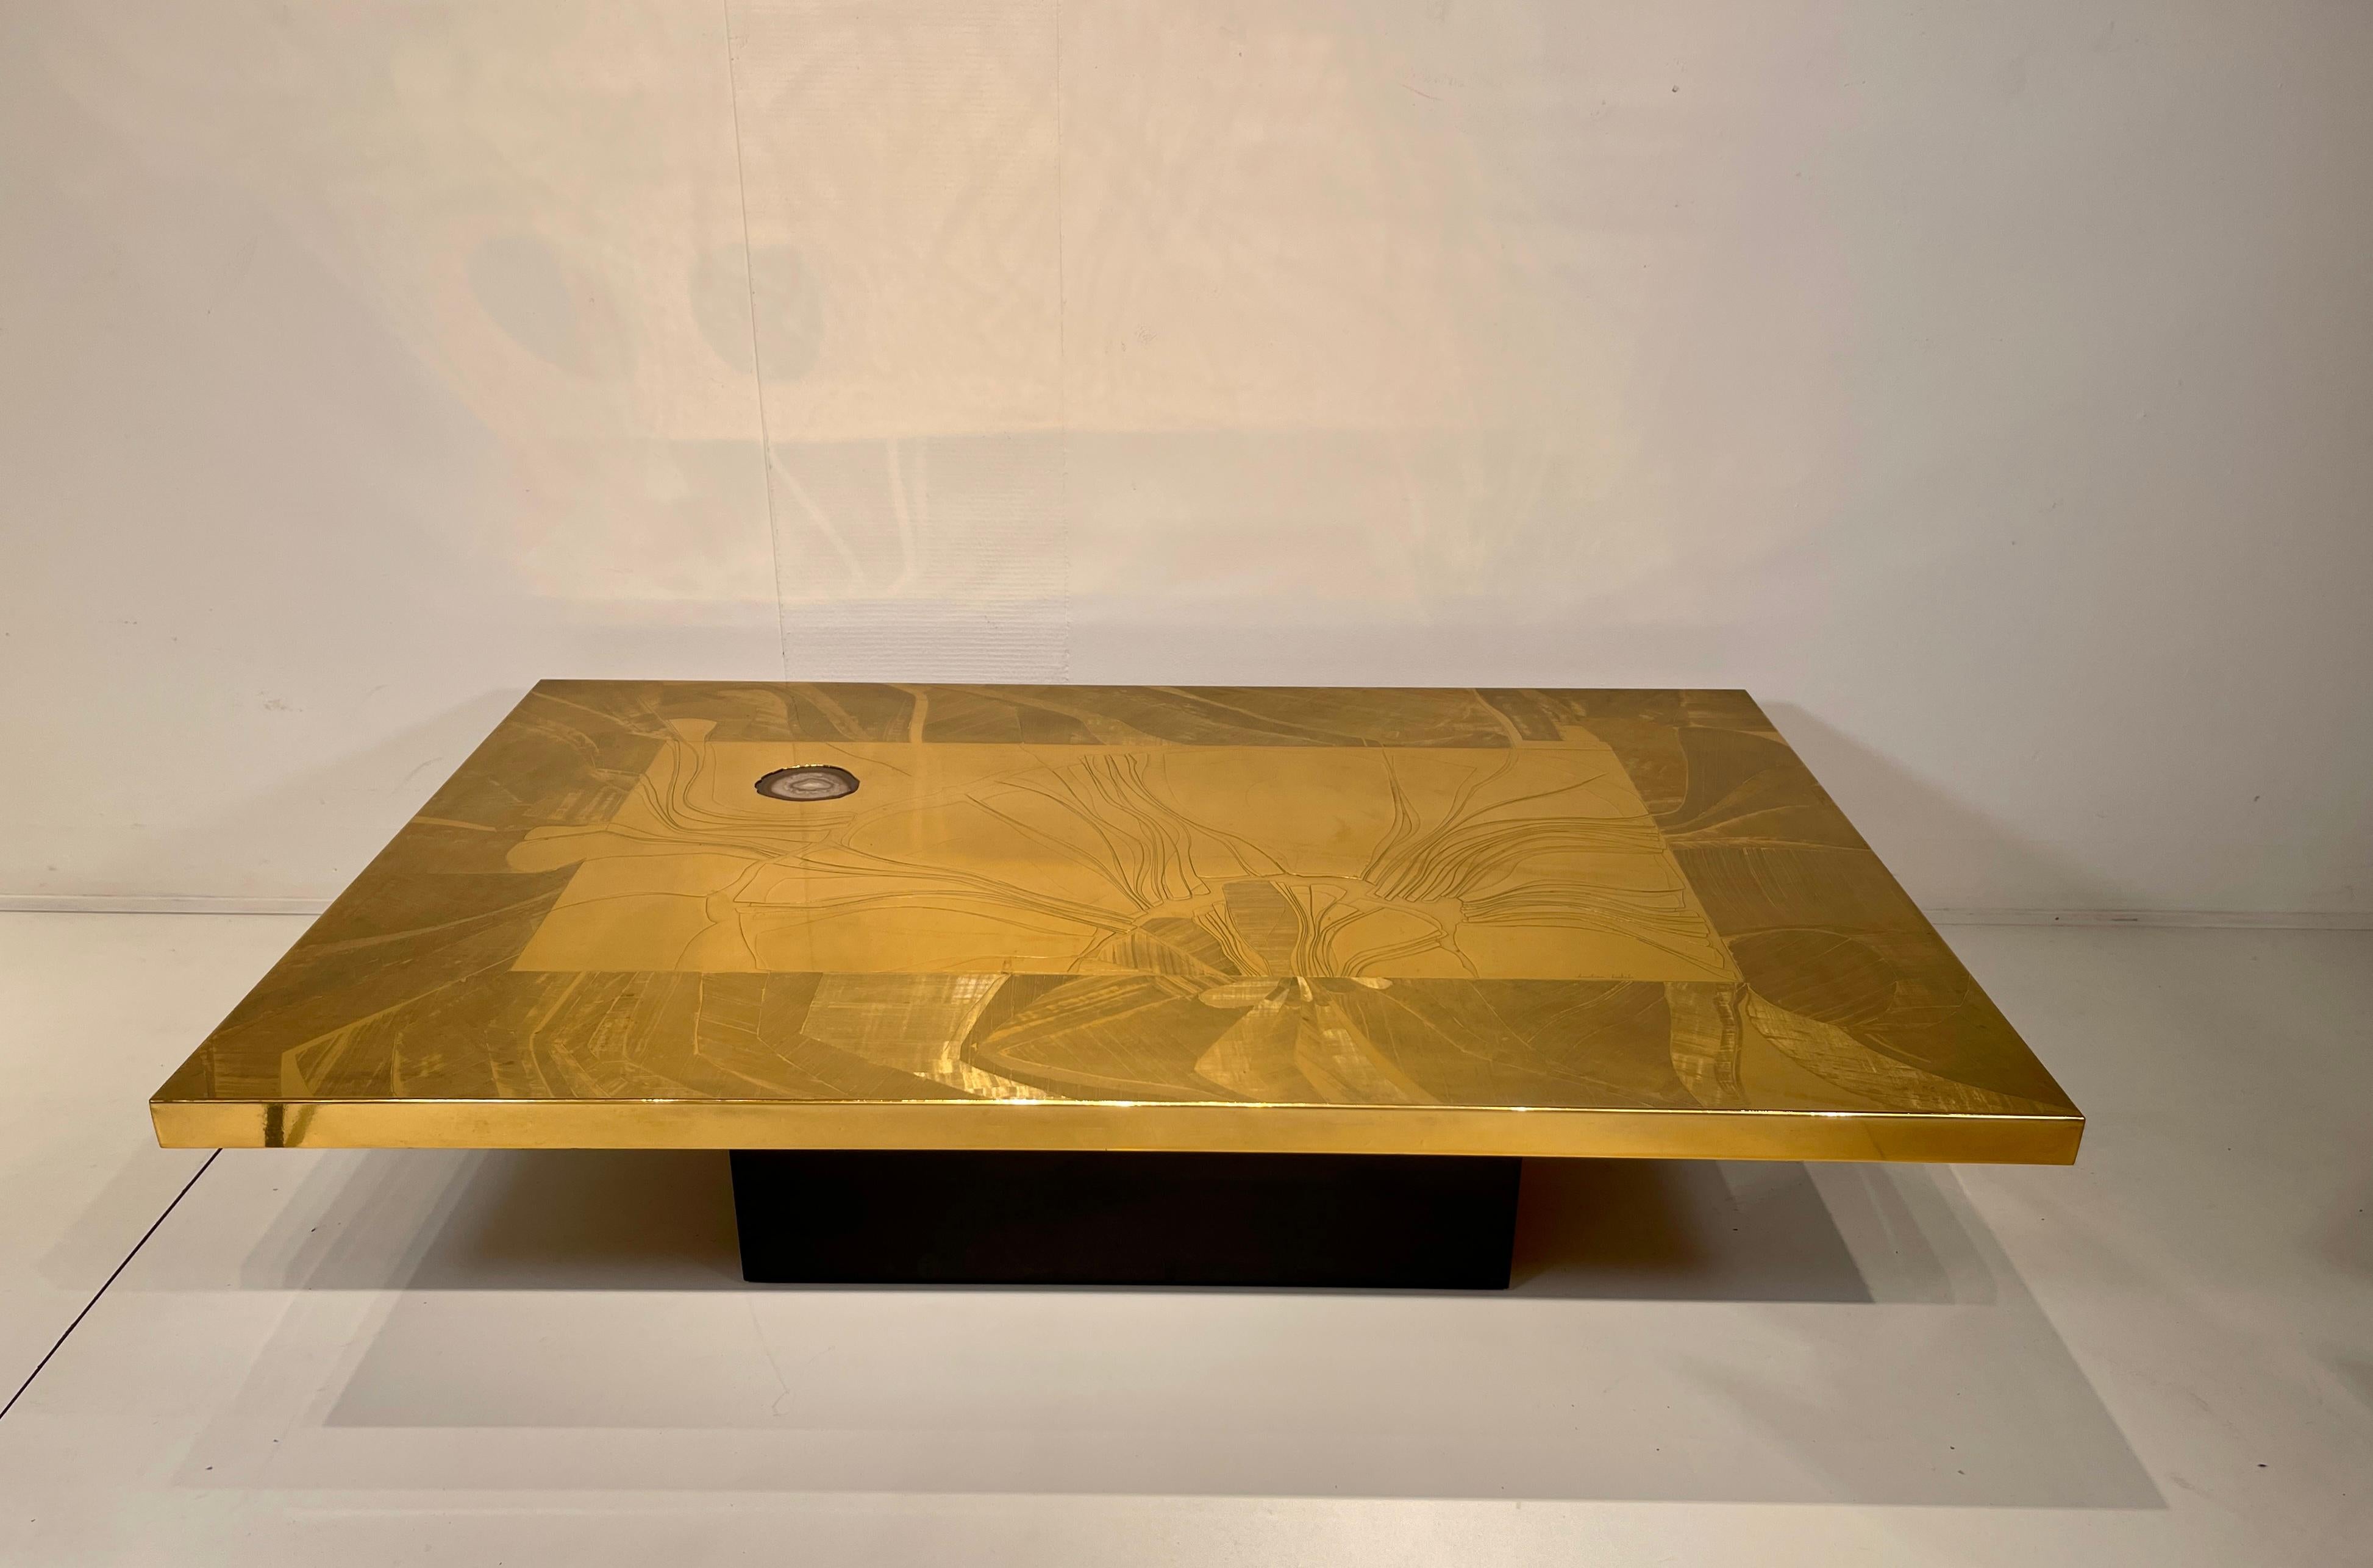 Engraved etched brass coffee table designed by Christian Krekels in 1970s, with malachite stone top. This furniture has a New refresh, new varnish and polish.
Signed by the Artist.